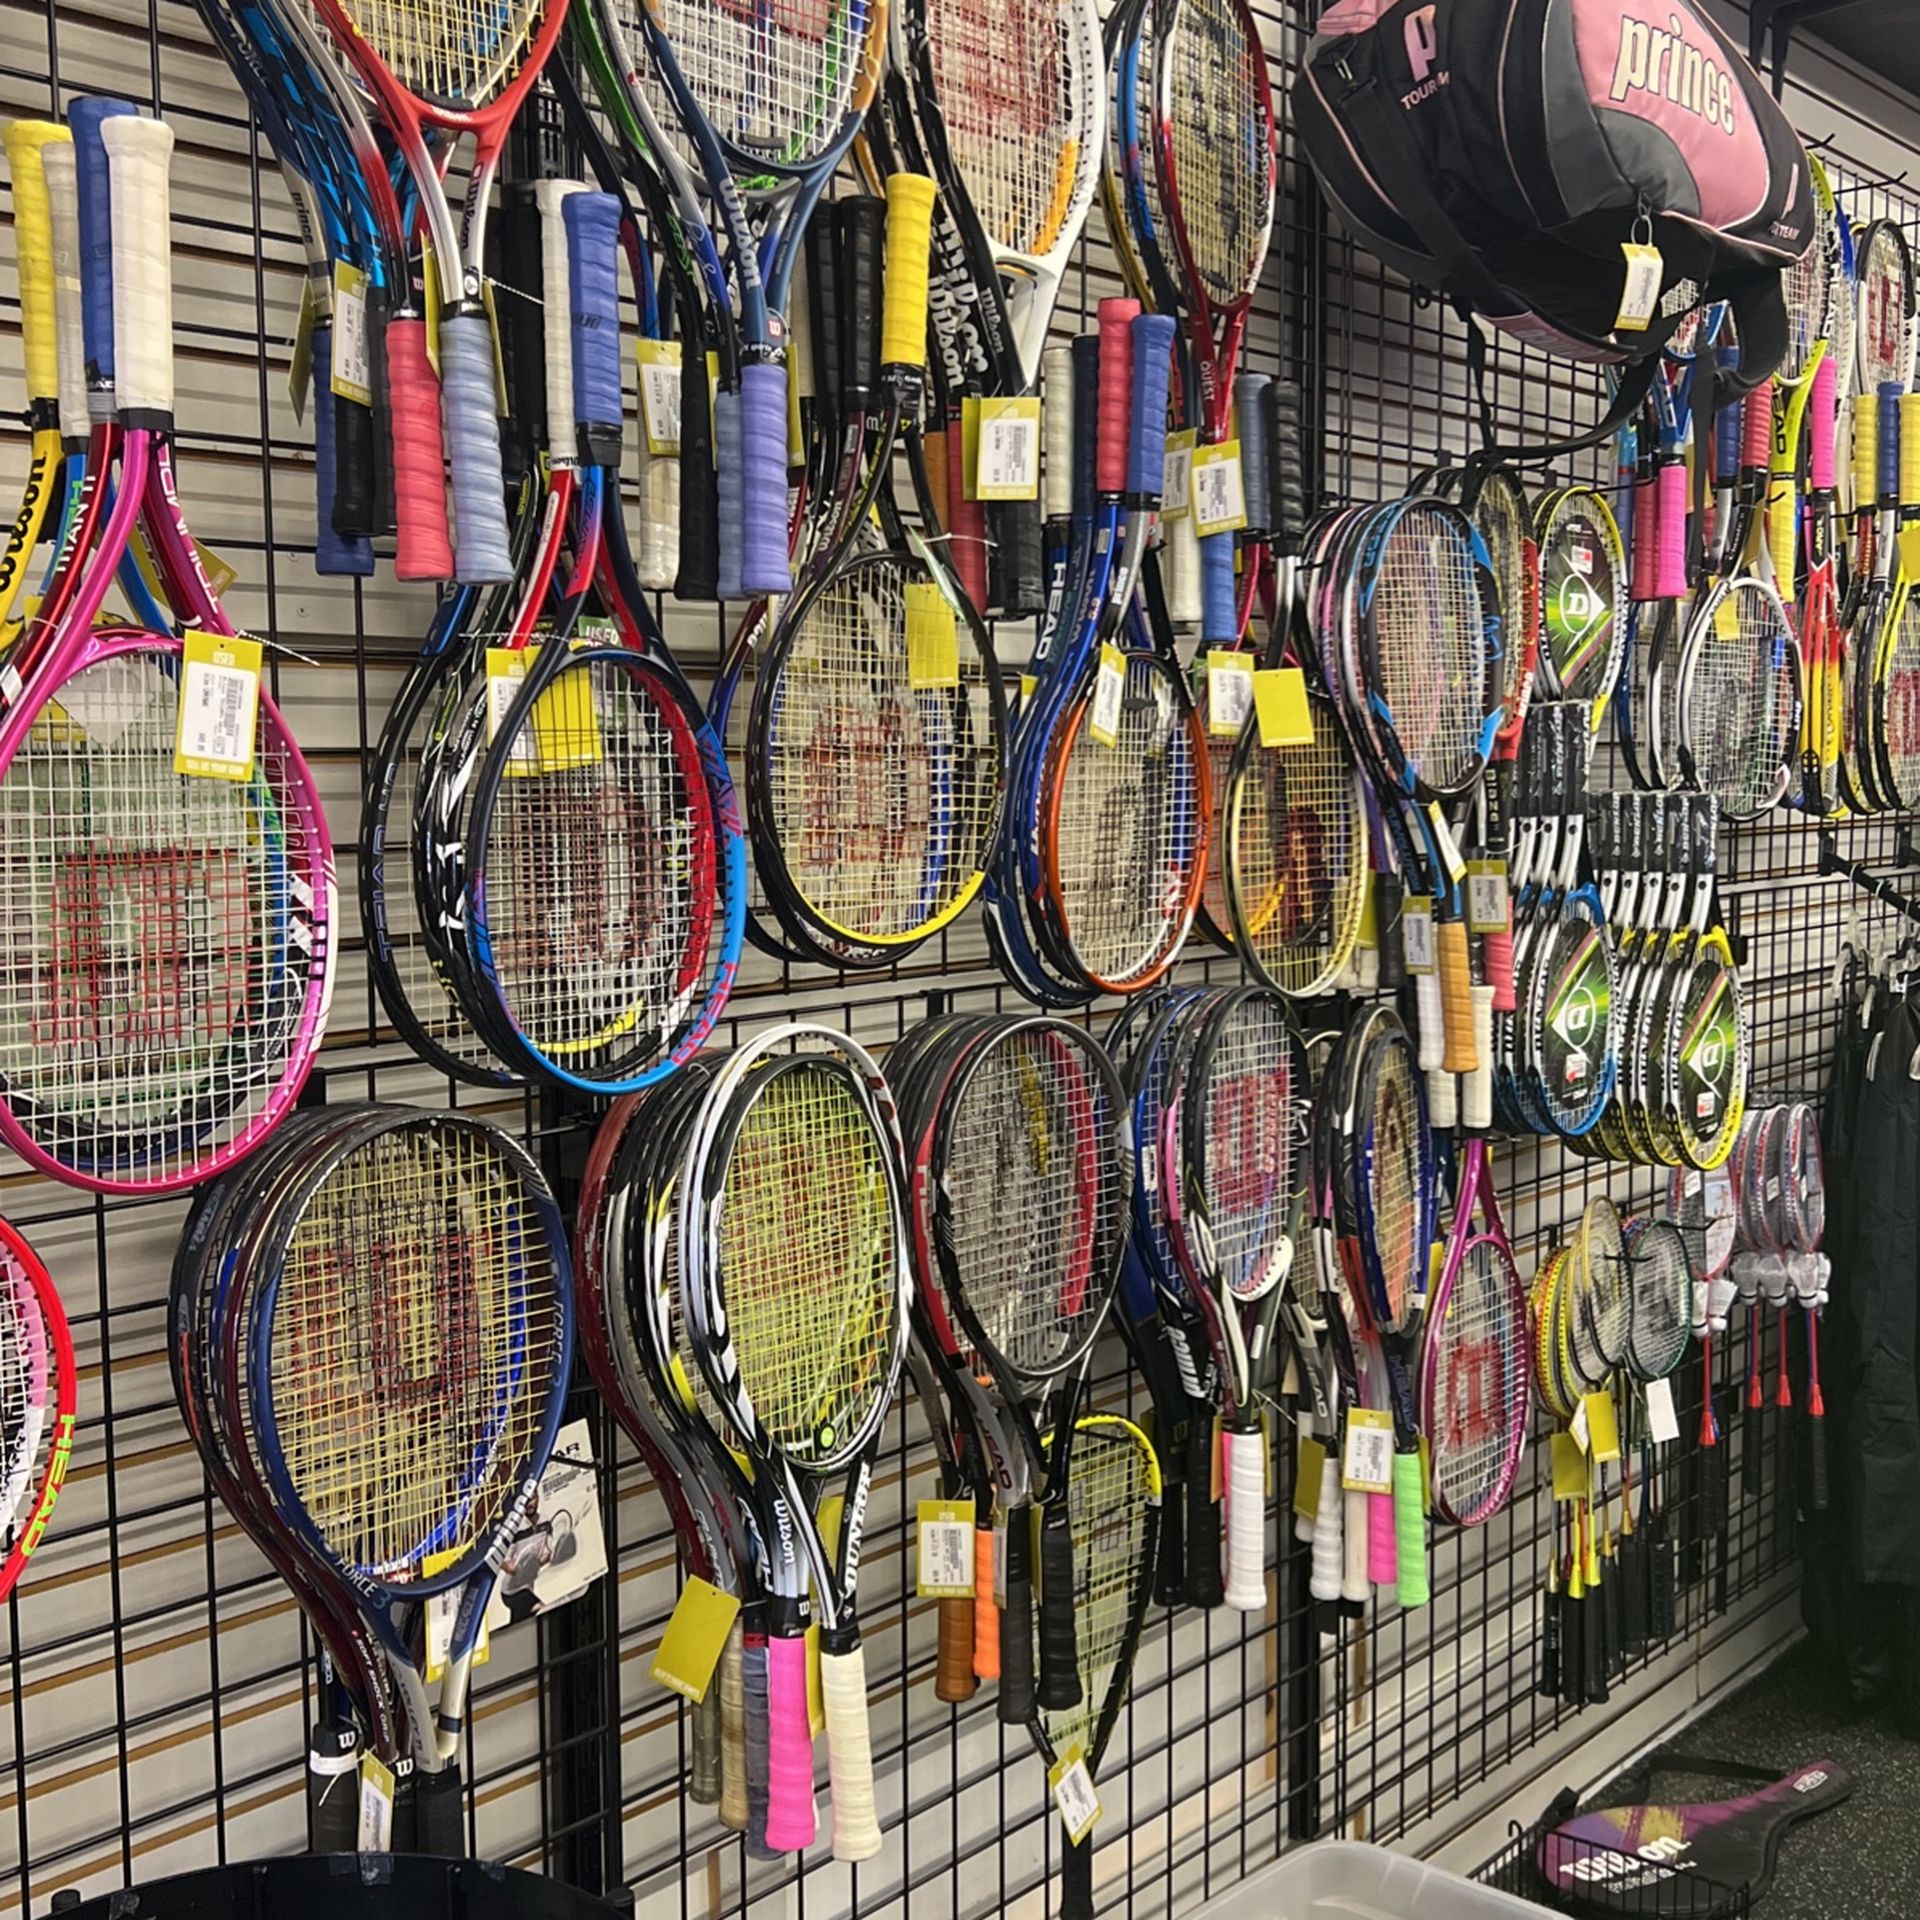 Tennis Rackets Used $19.99 And Up Each